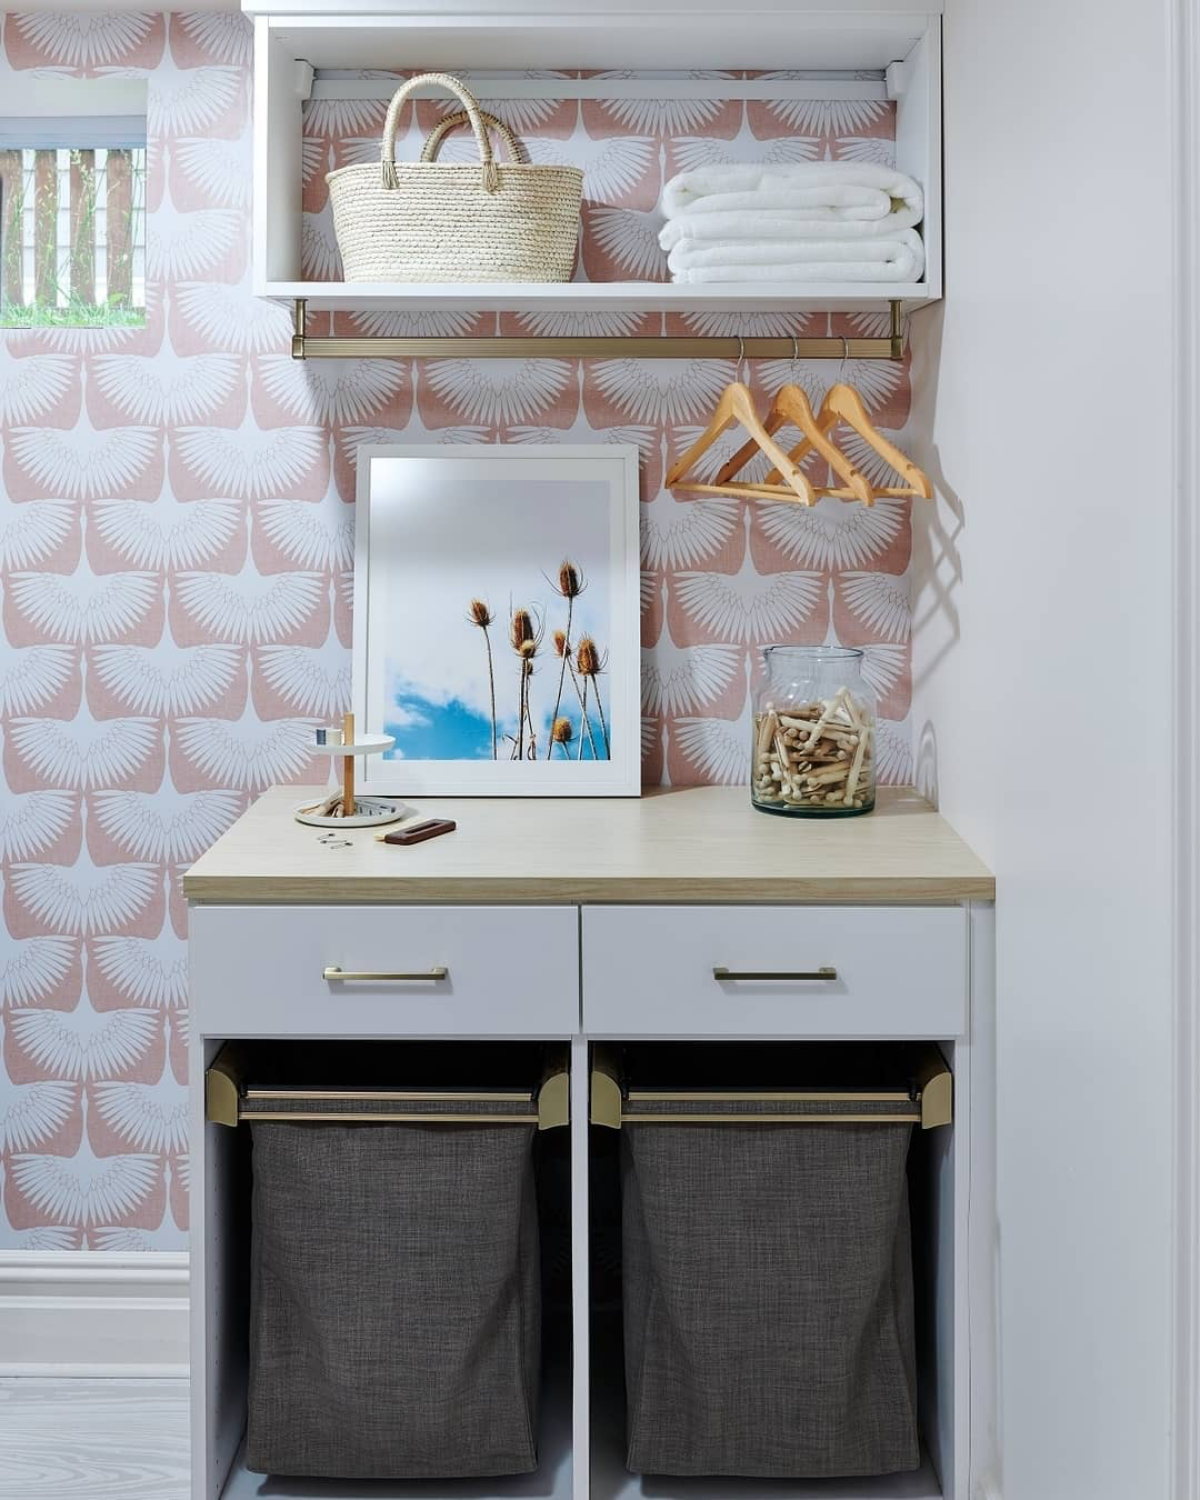 baskets in laundry room pink room